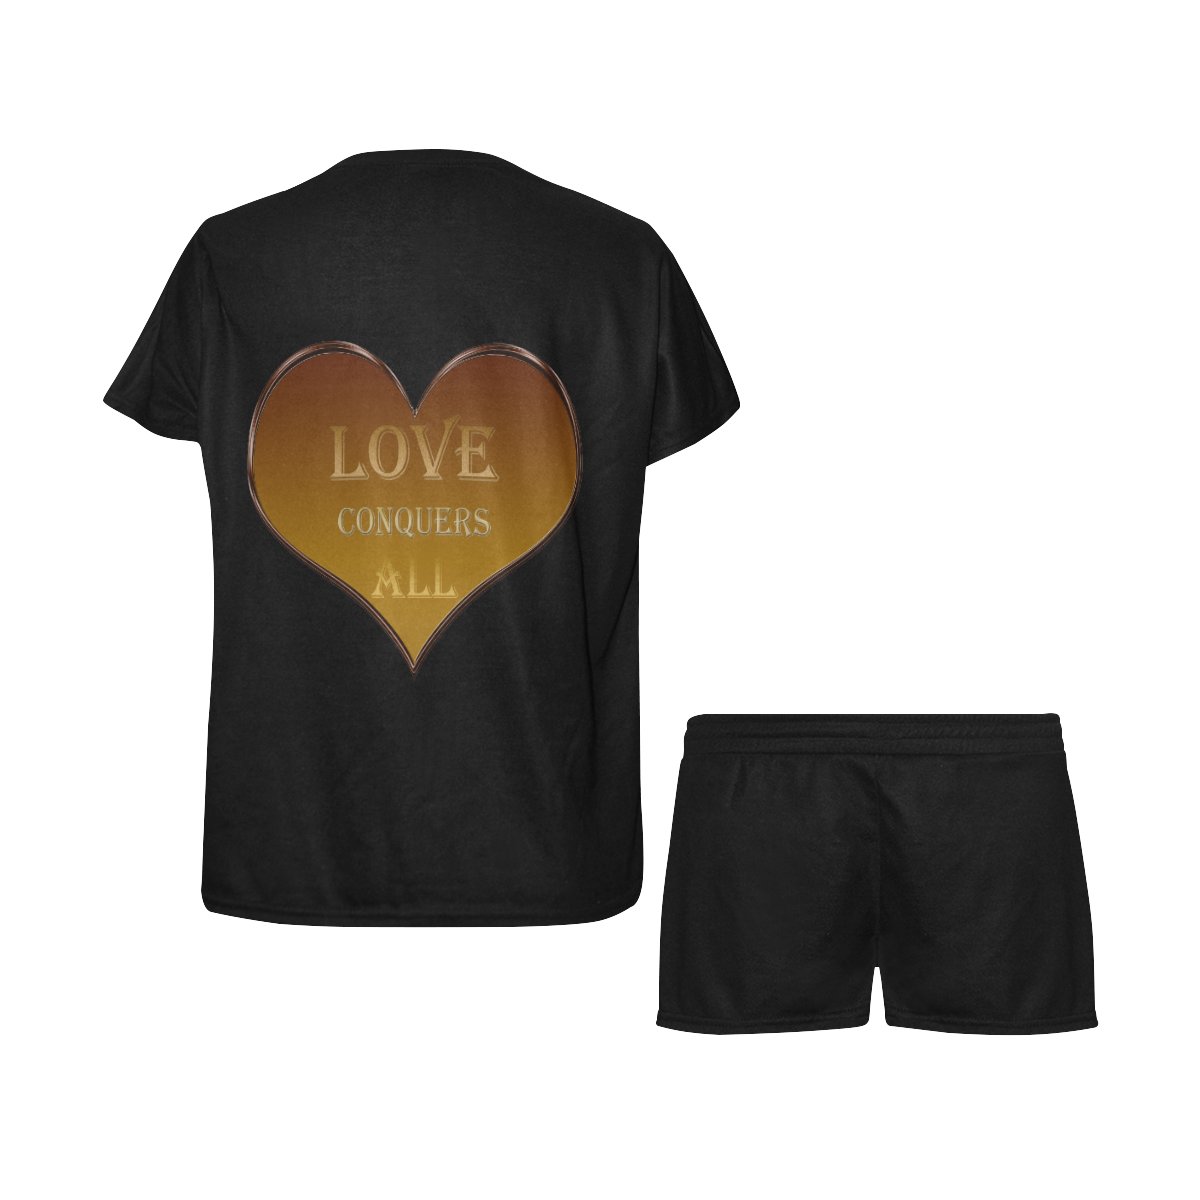 Love Conquers All Heart Women's Short Pajama Set